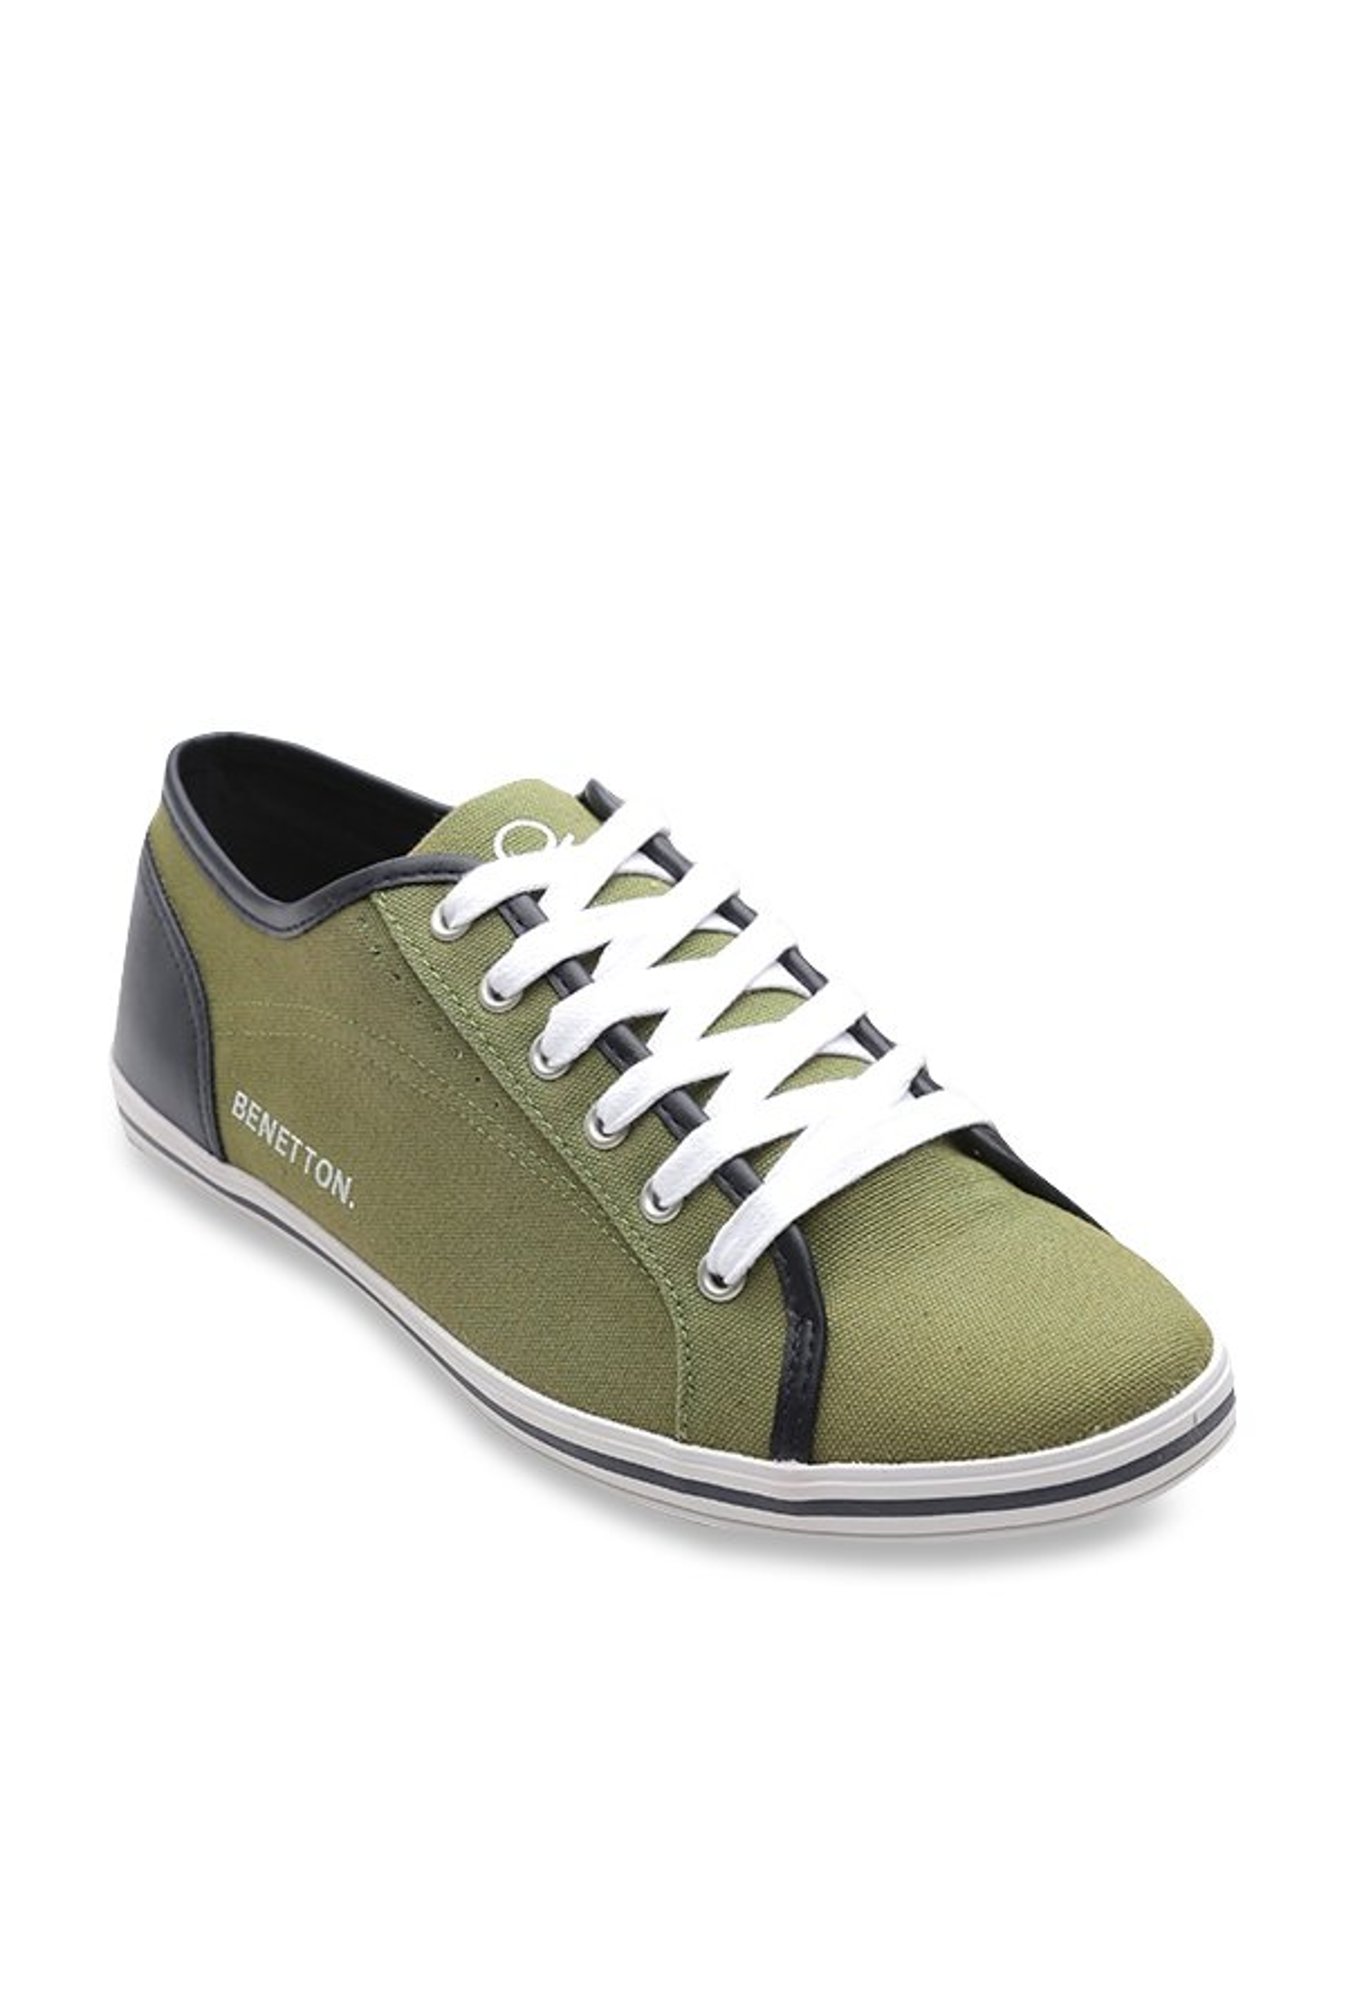 ucb olive sneakers